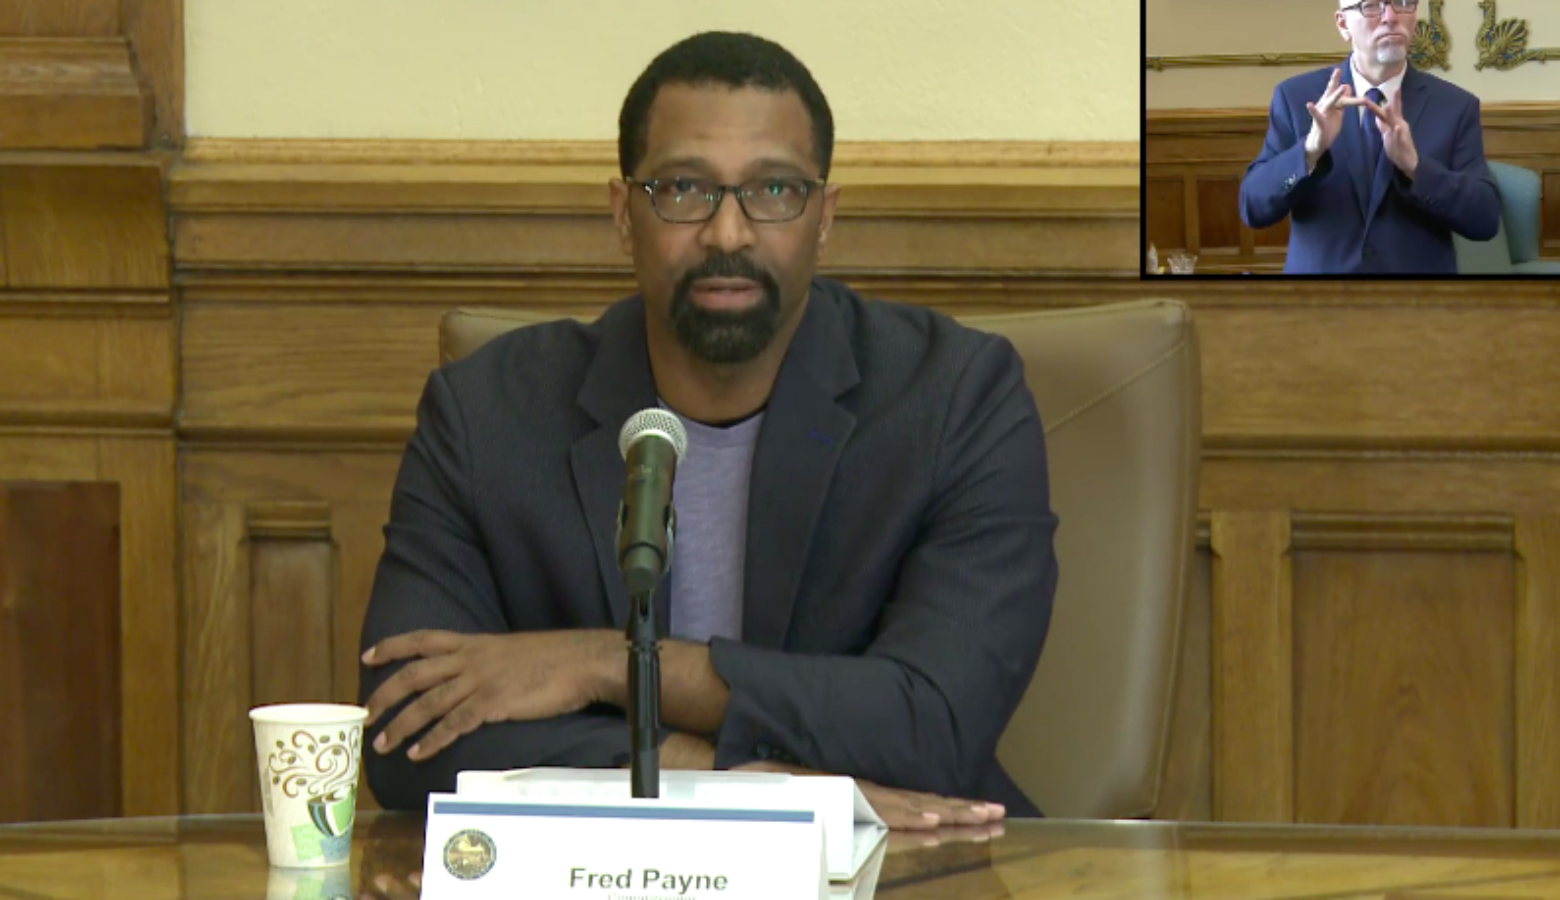 Fred Payne, commissioner of the Indiana Department of Workforce Development, gives an update on the agency's actions at a virtual press conference. (Zoom screenshot)